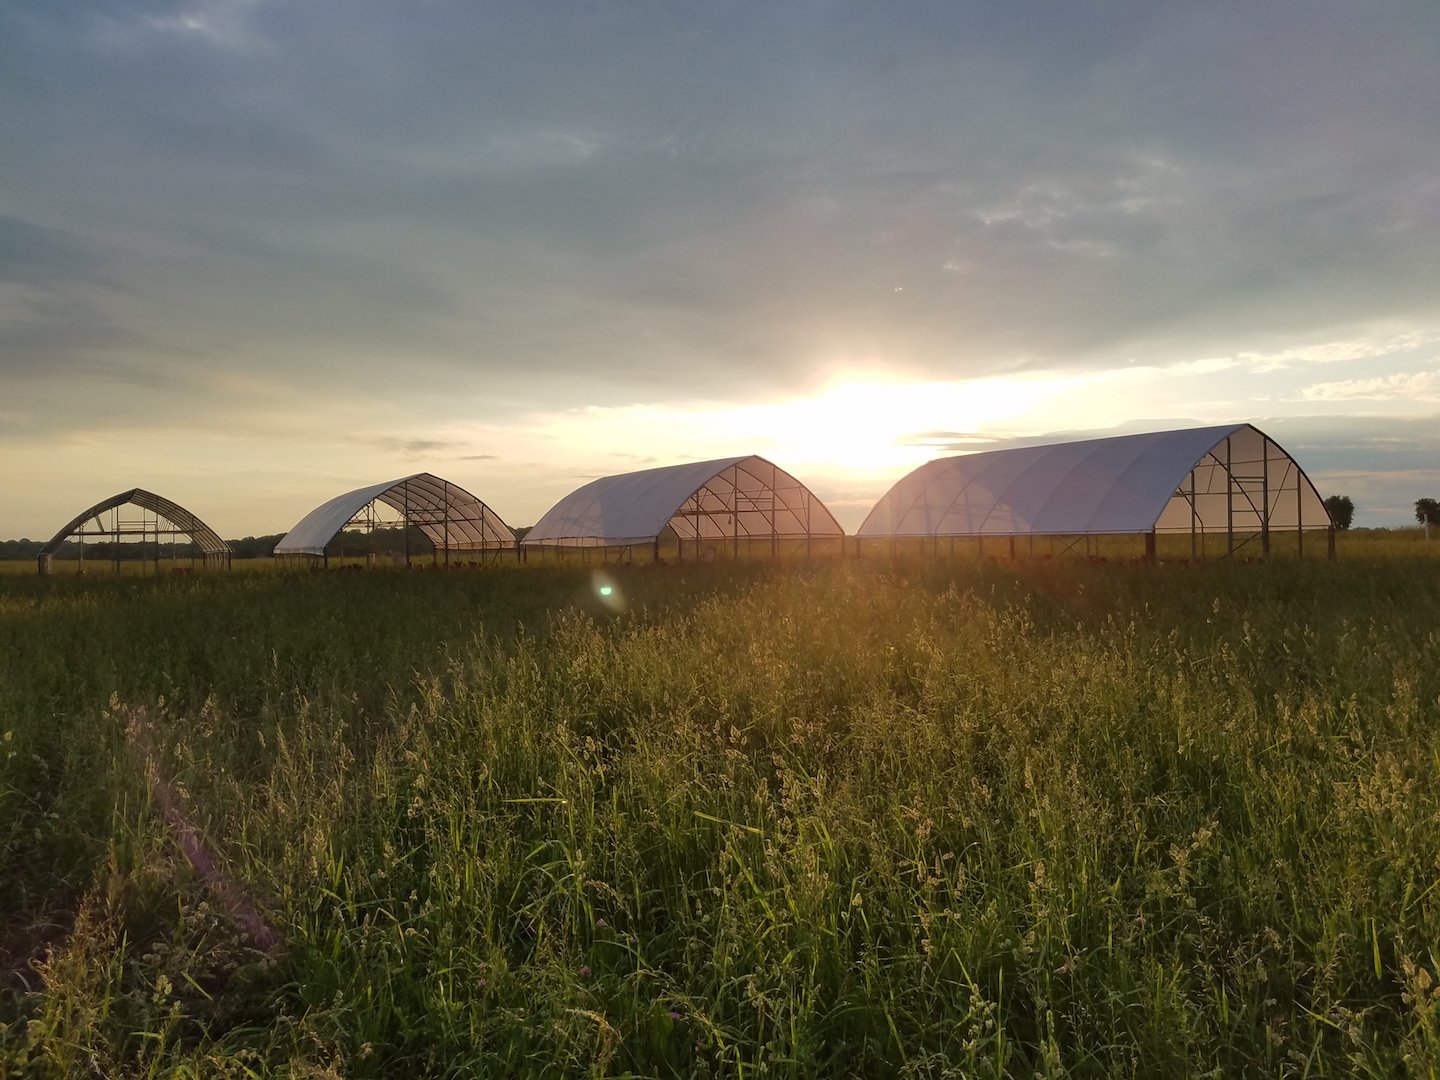 Previous Happening: Farm Happenings for August 9, 2019